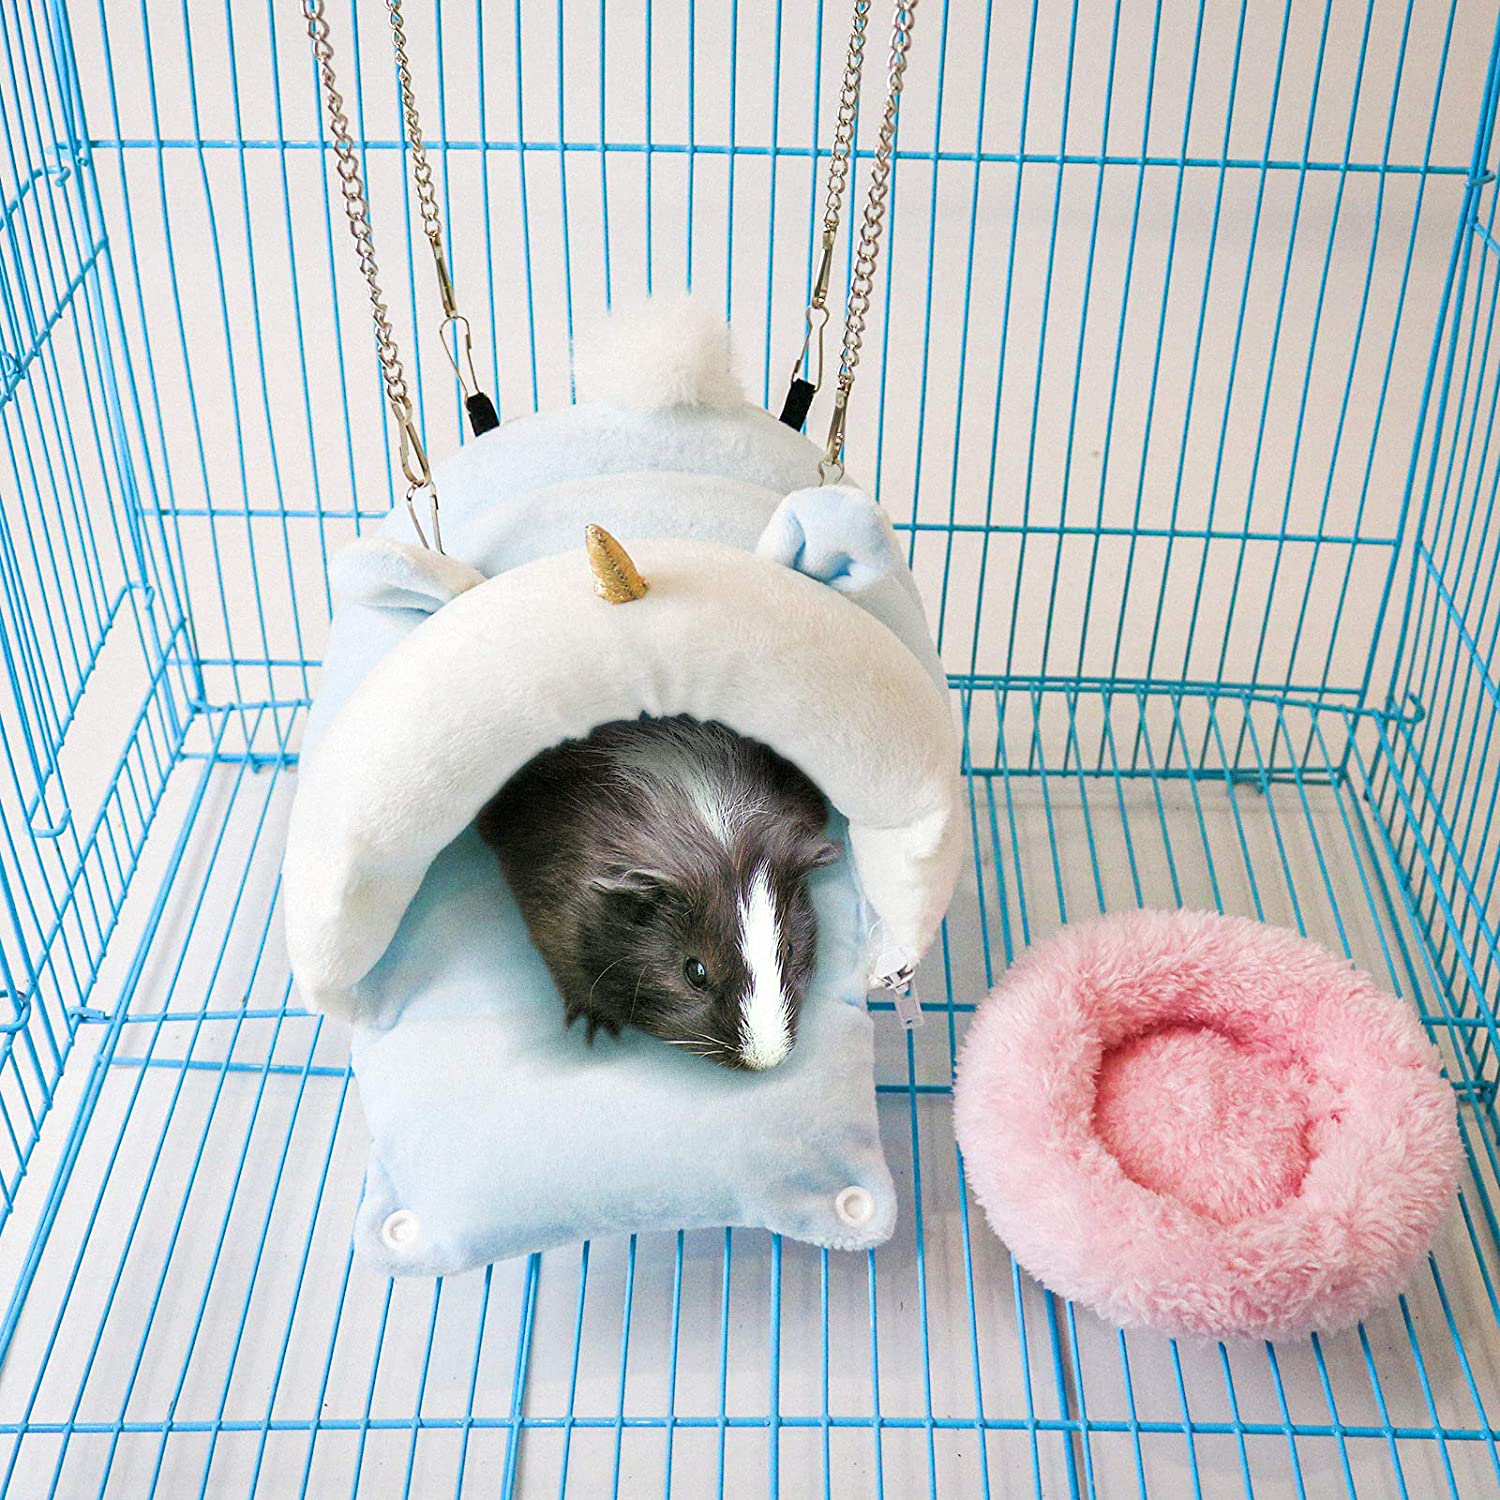 Roundler Hamster Bed Houses,Small Animal Hideouts,Cozy Warm Hanging Sleeping House Small Pet Animals Habitat Cage Accessories for Chinchilla,Ferrets,Mini Hedgehog,Sugar Glider,Rat,Guinea Pig